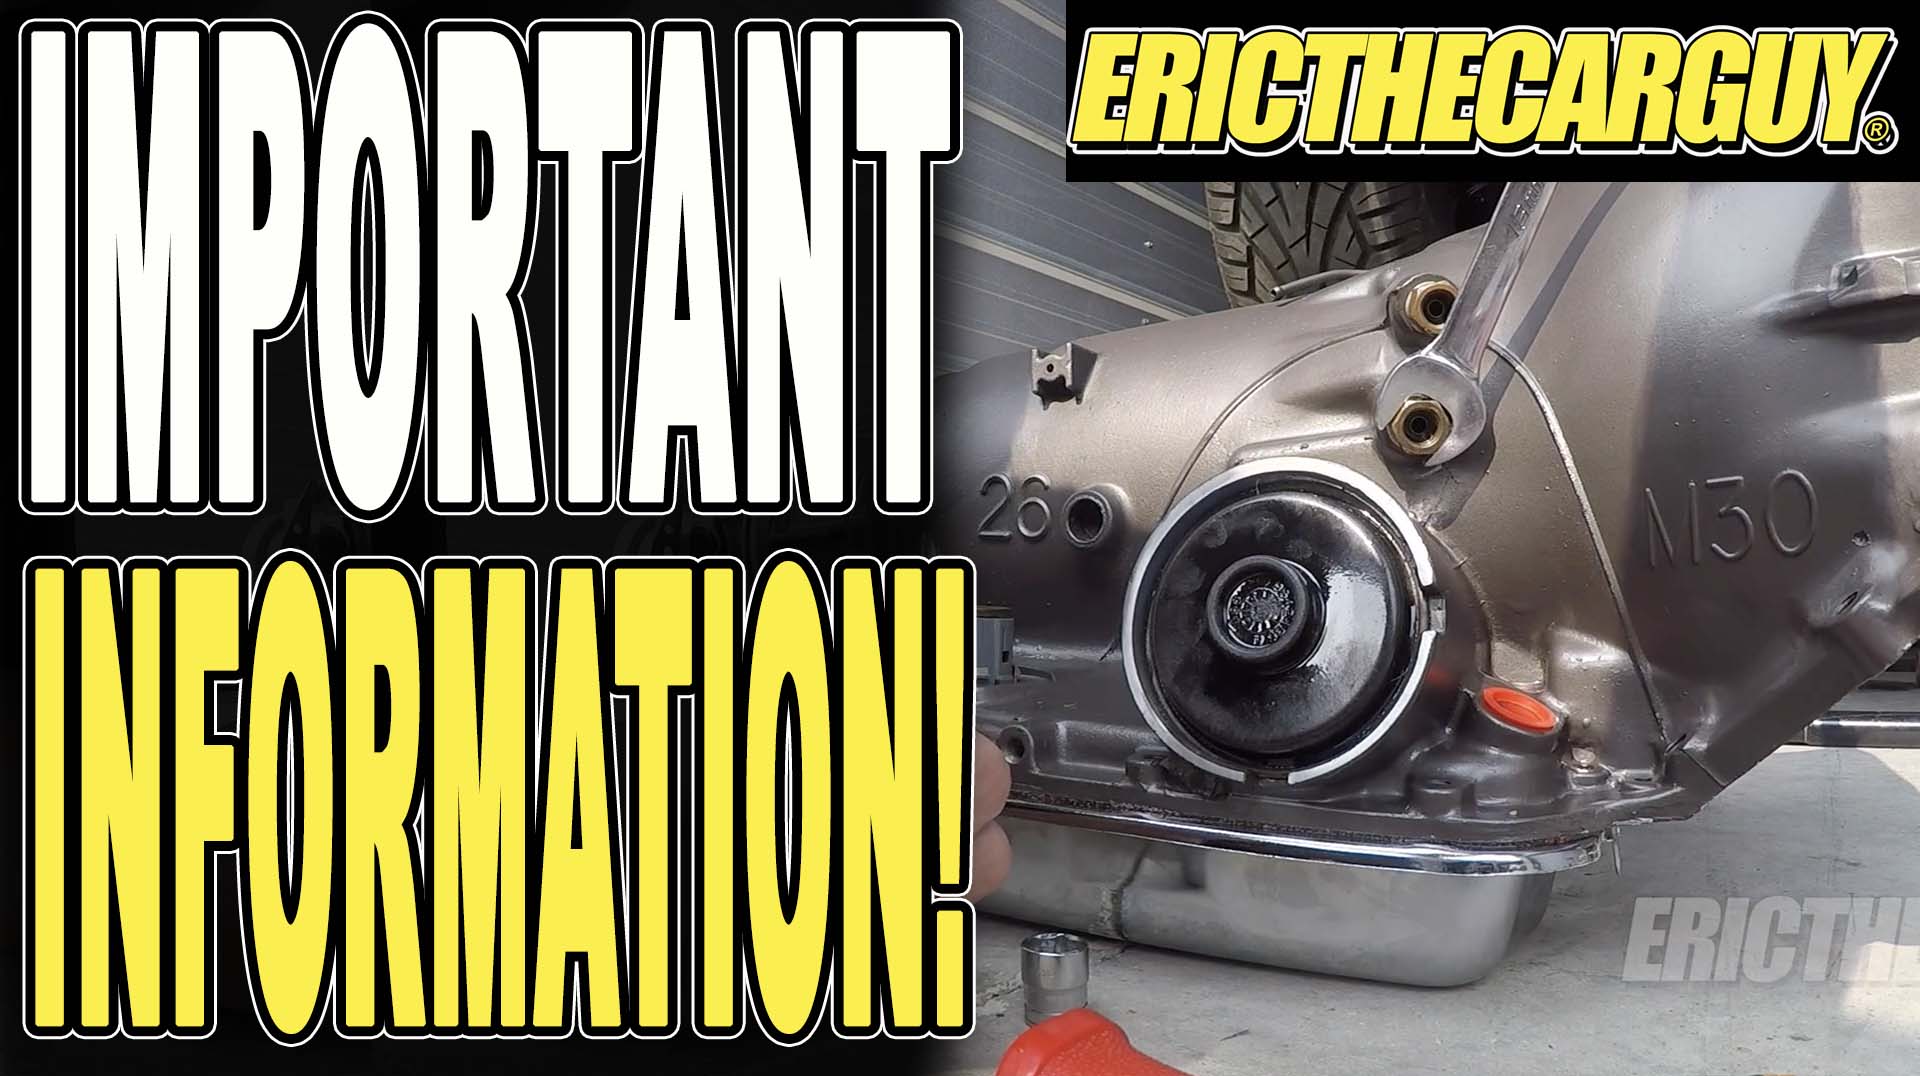 Quick Tip-Throttle Cleaning - EricTheCarGuy 